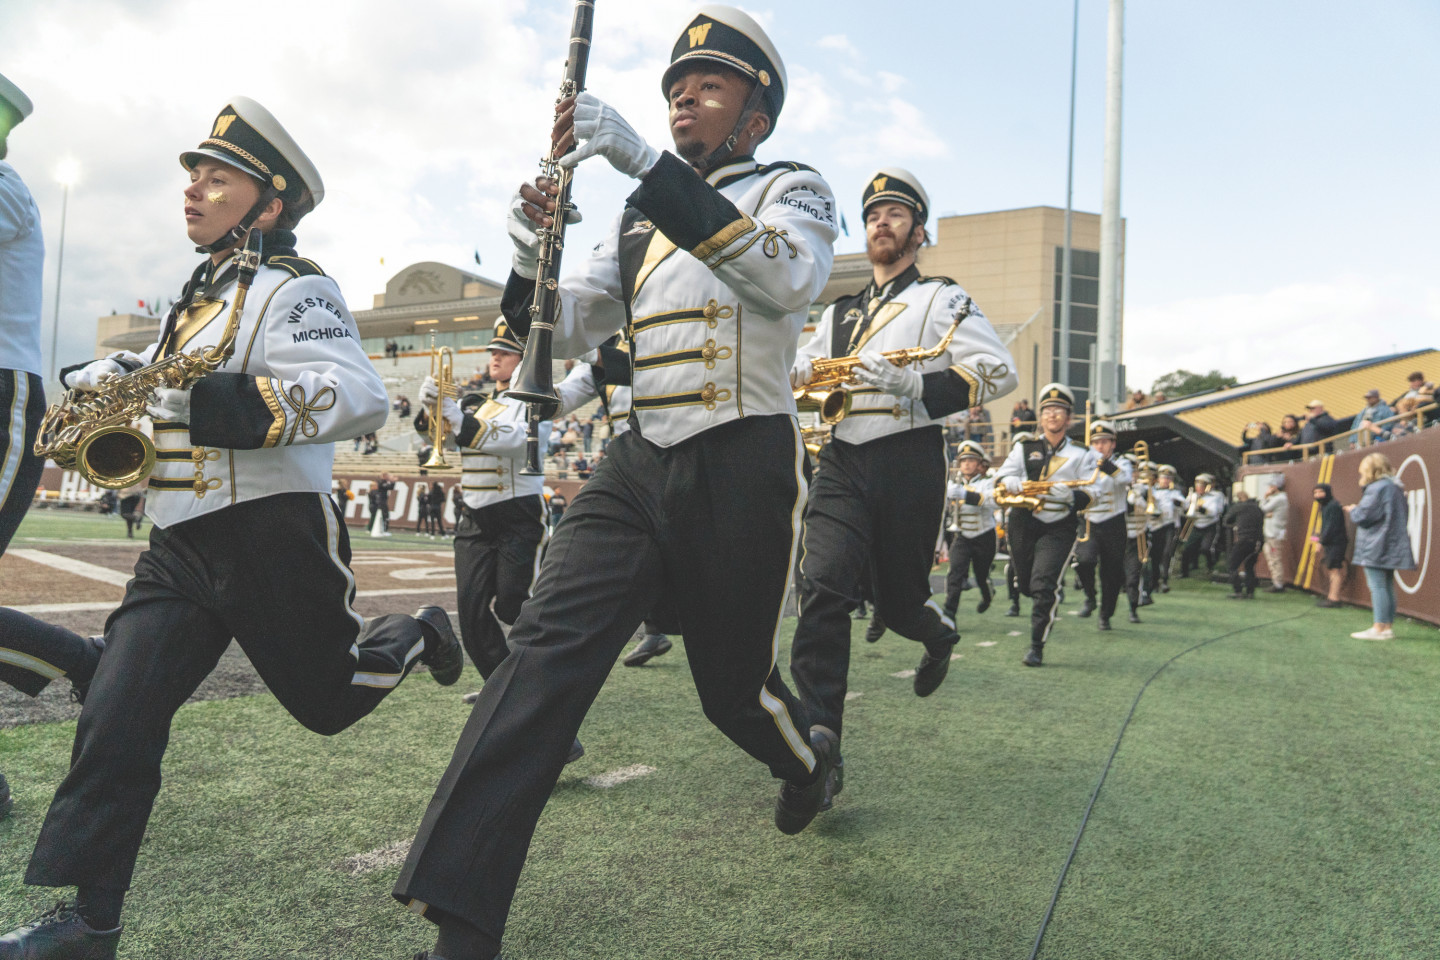 The Marching 100